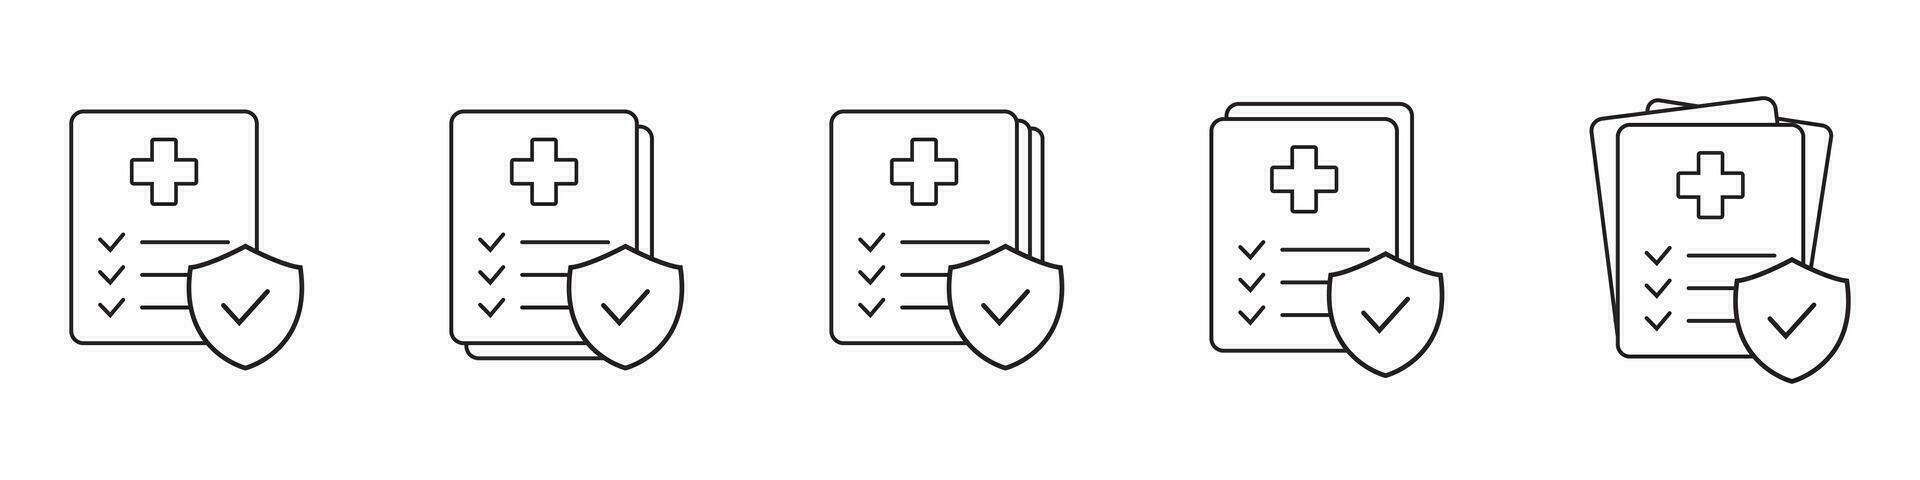 Medical insurance icon, Health insurance icon on white background. Vector illustration.